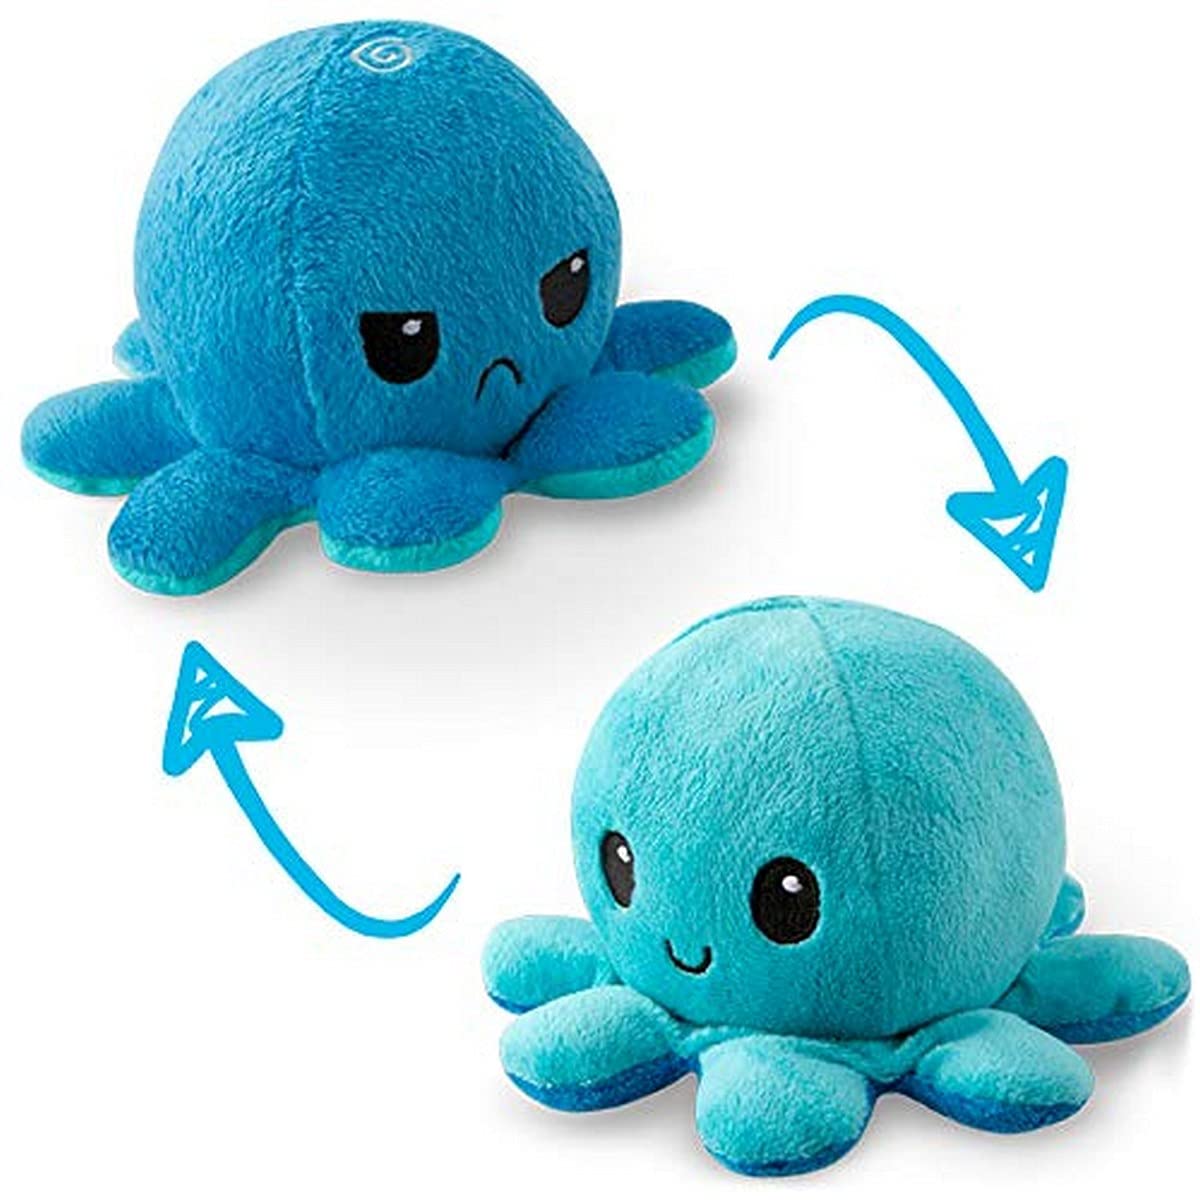 TeeTurtle | The Original Reversible Octopus Plushie | Patented Design | Light Pink + Light Blue | Happy + Angry | Show your mood without saying a word!